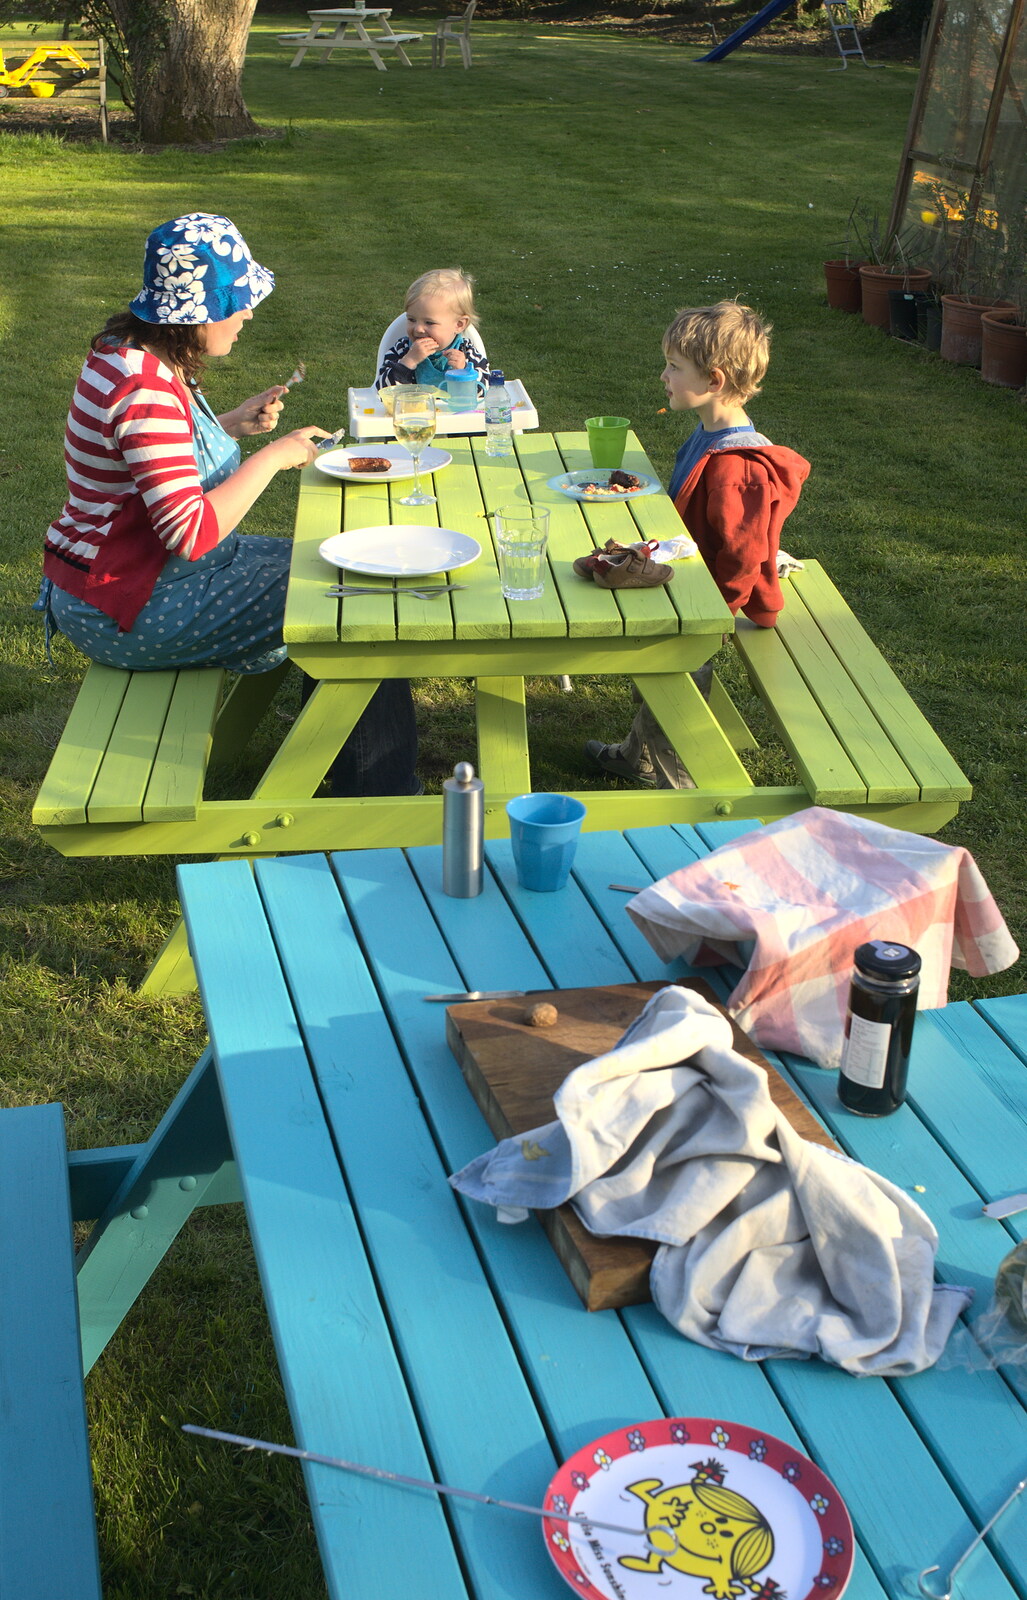 Back home, we eat outside from The Garage-Eating Monster of Southwark, London - 1st May 2013